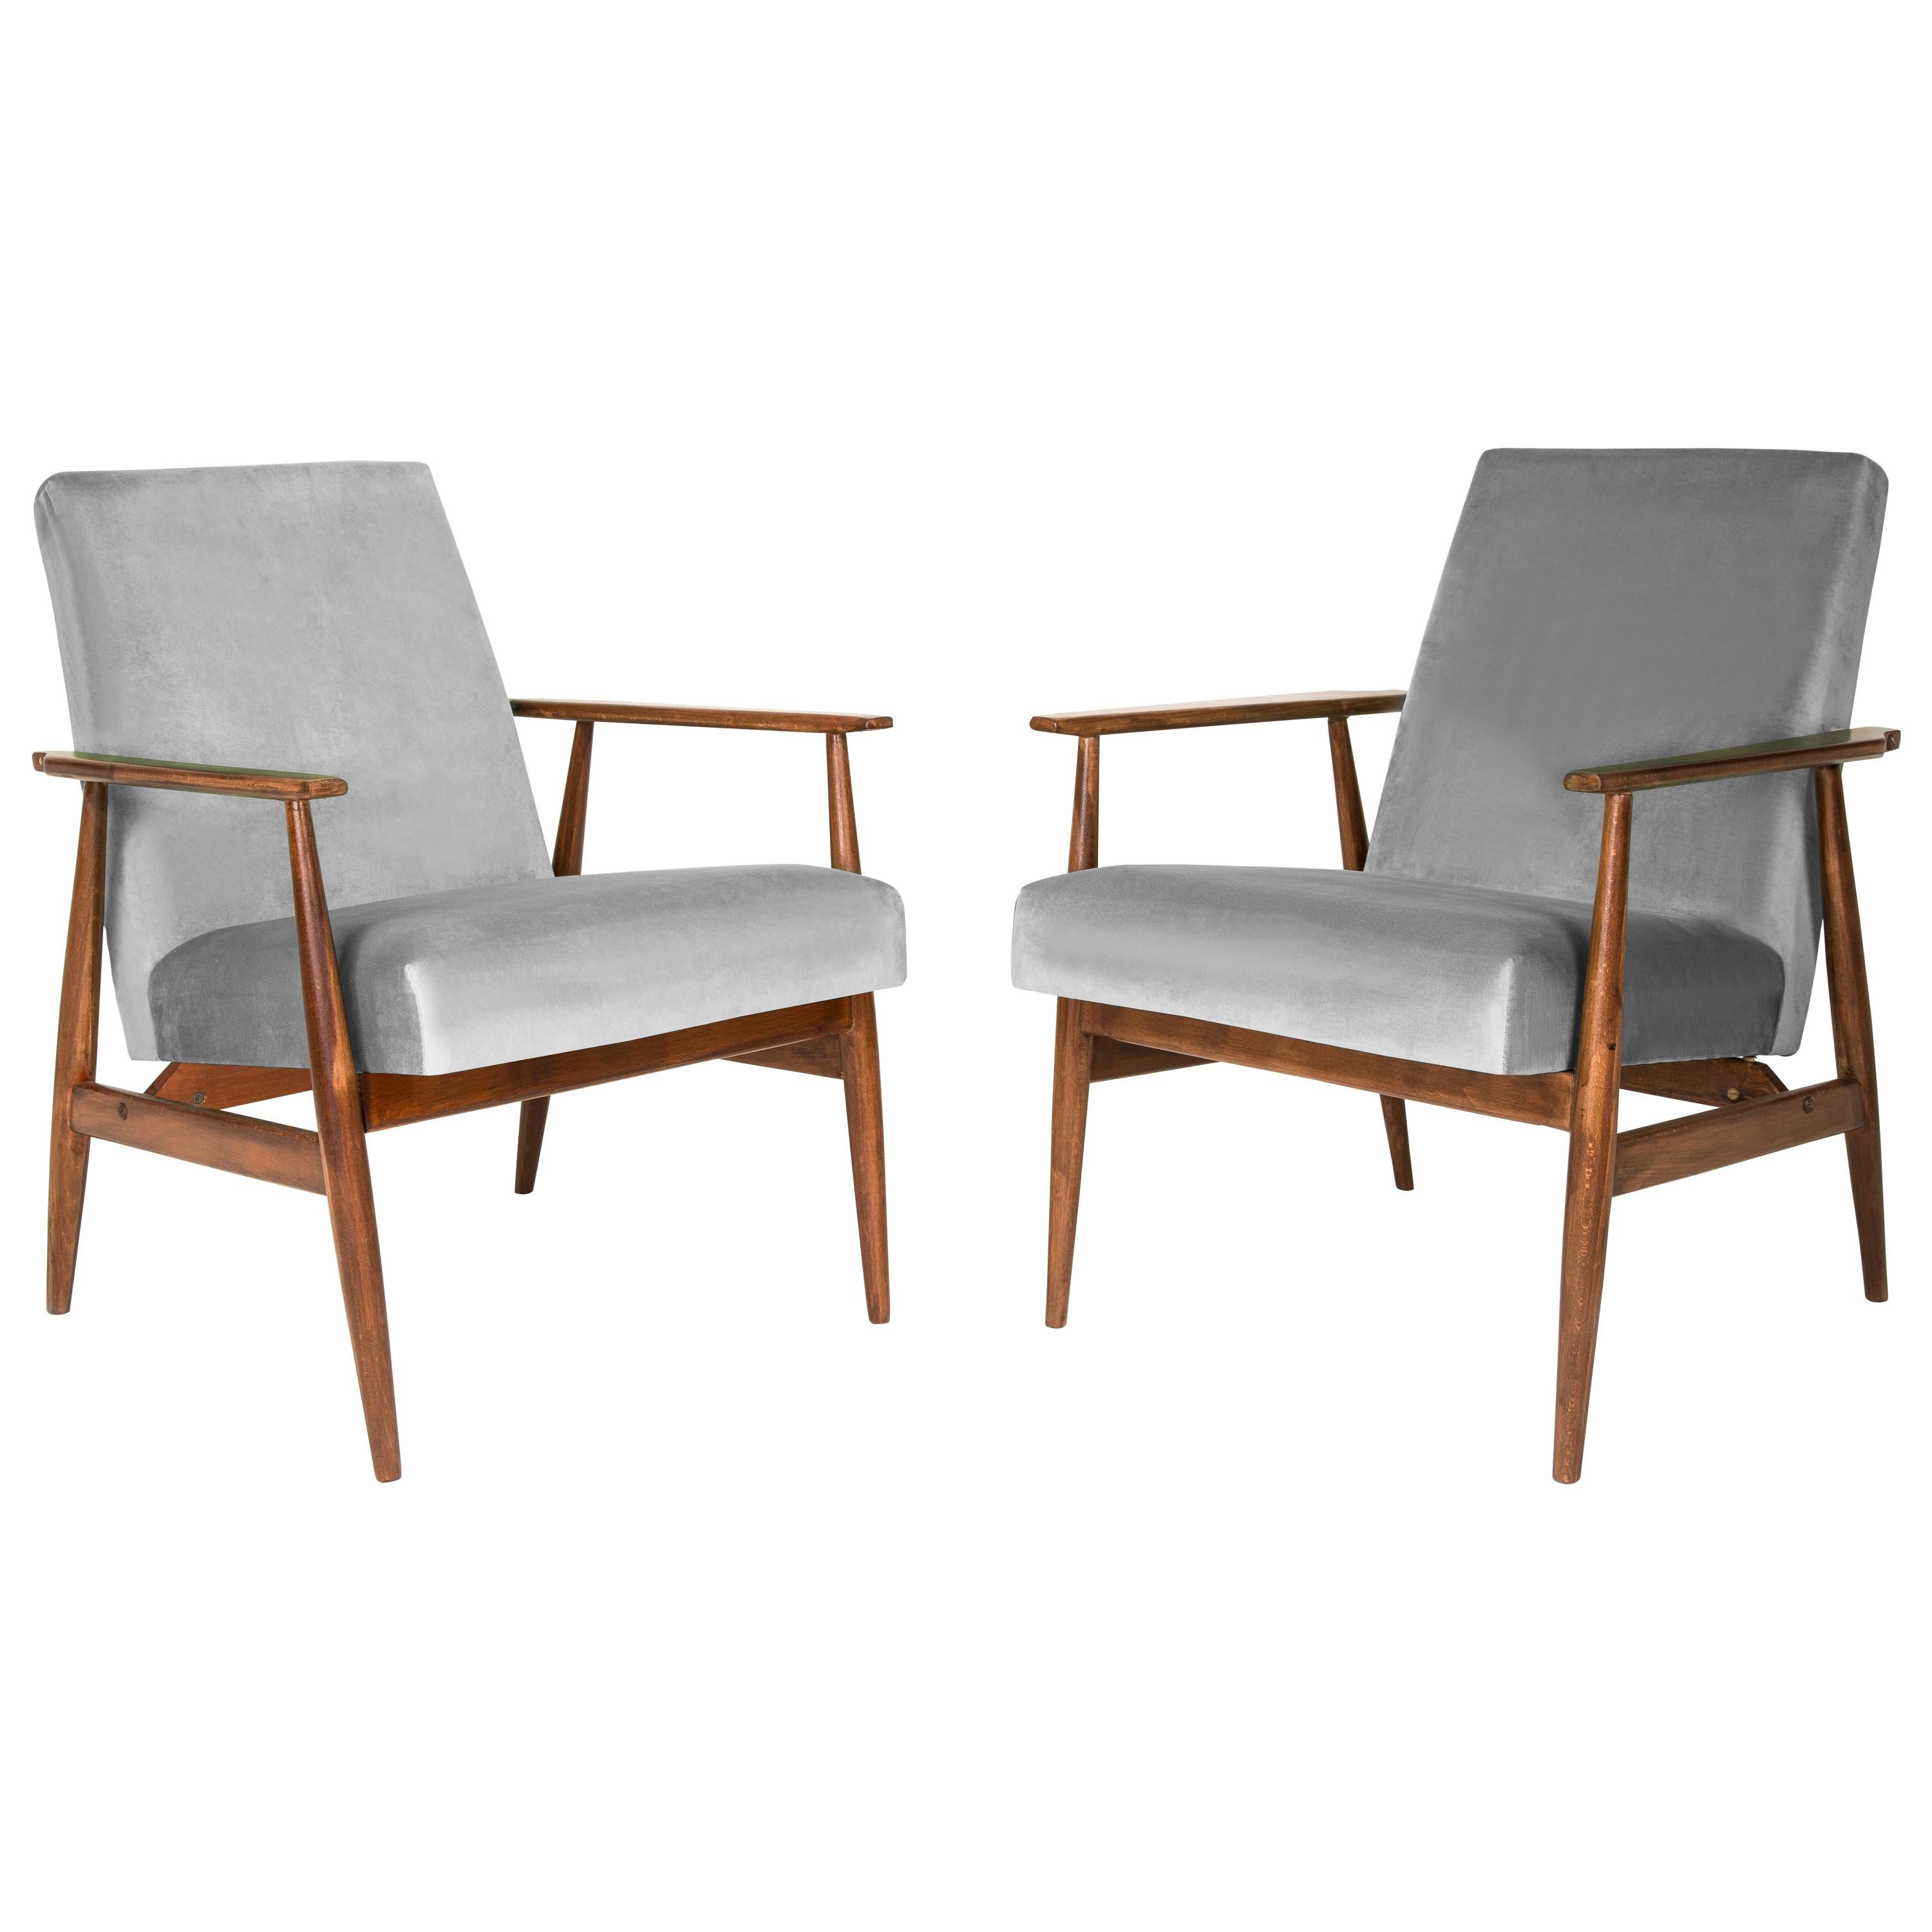 20th Century Pair of Light Gray Dante Armchairs, H. Lis, 1960s For Sale